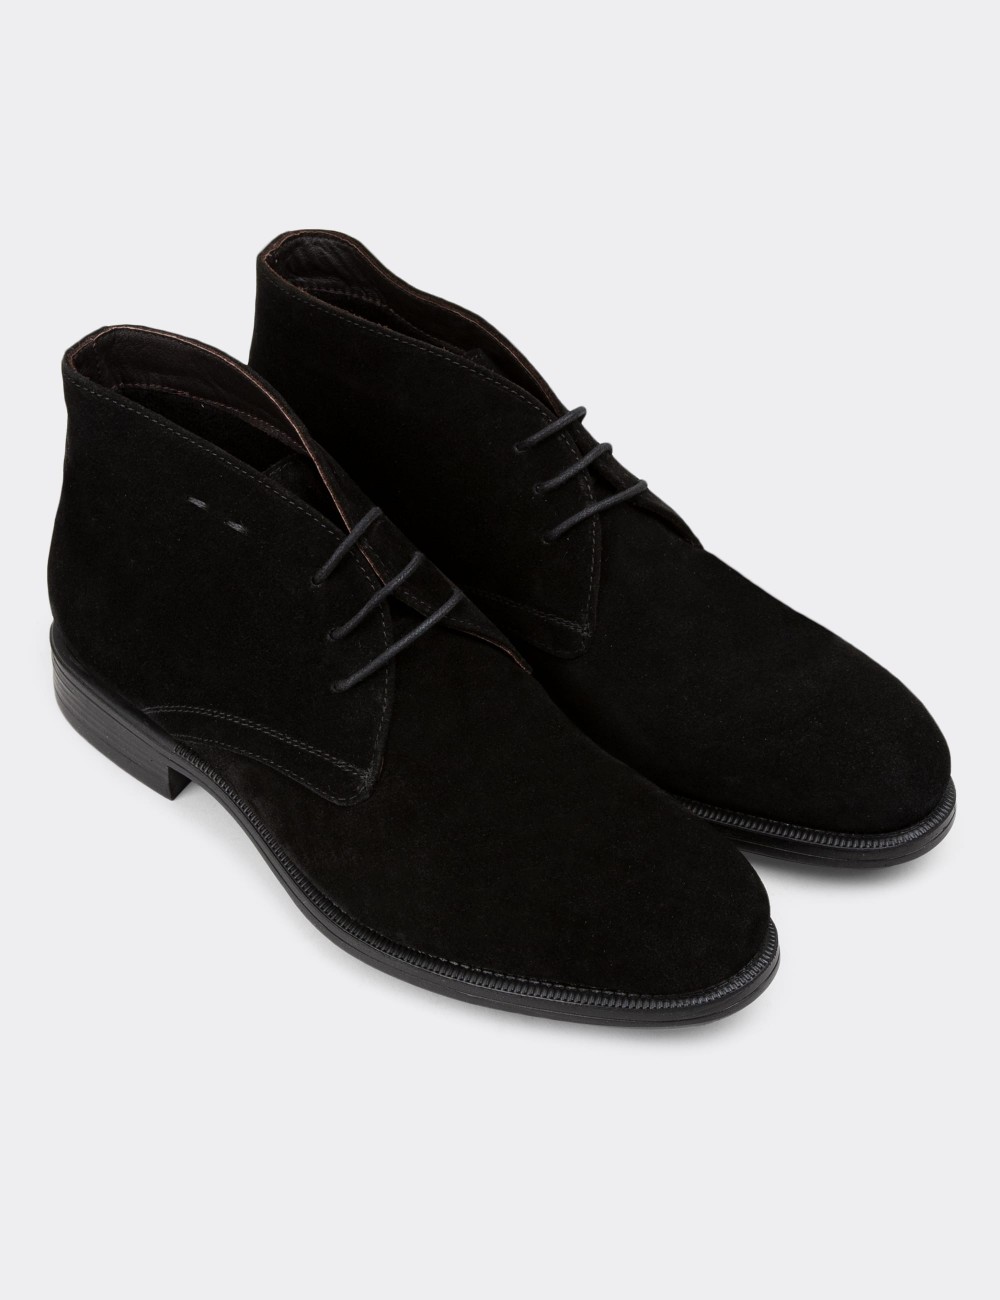 Black Suede Leather Desert Boots - 01295MSYHC13